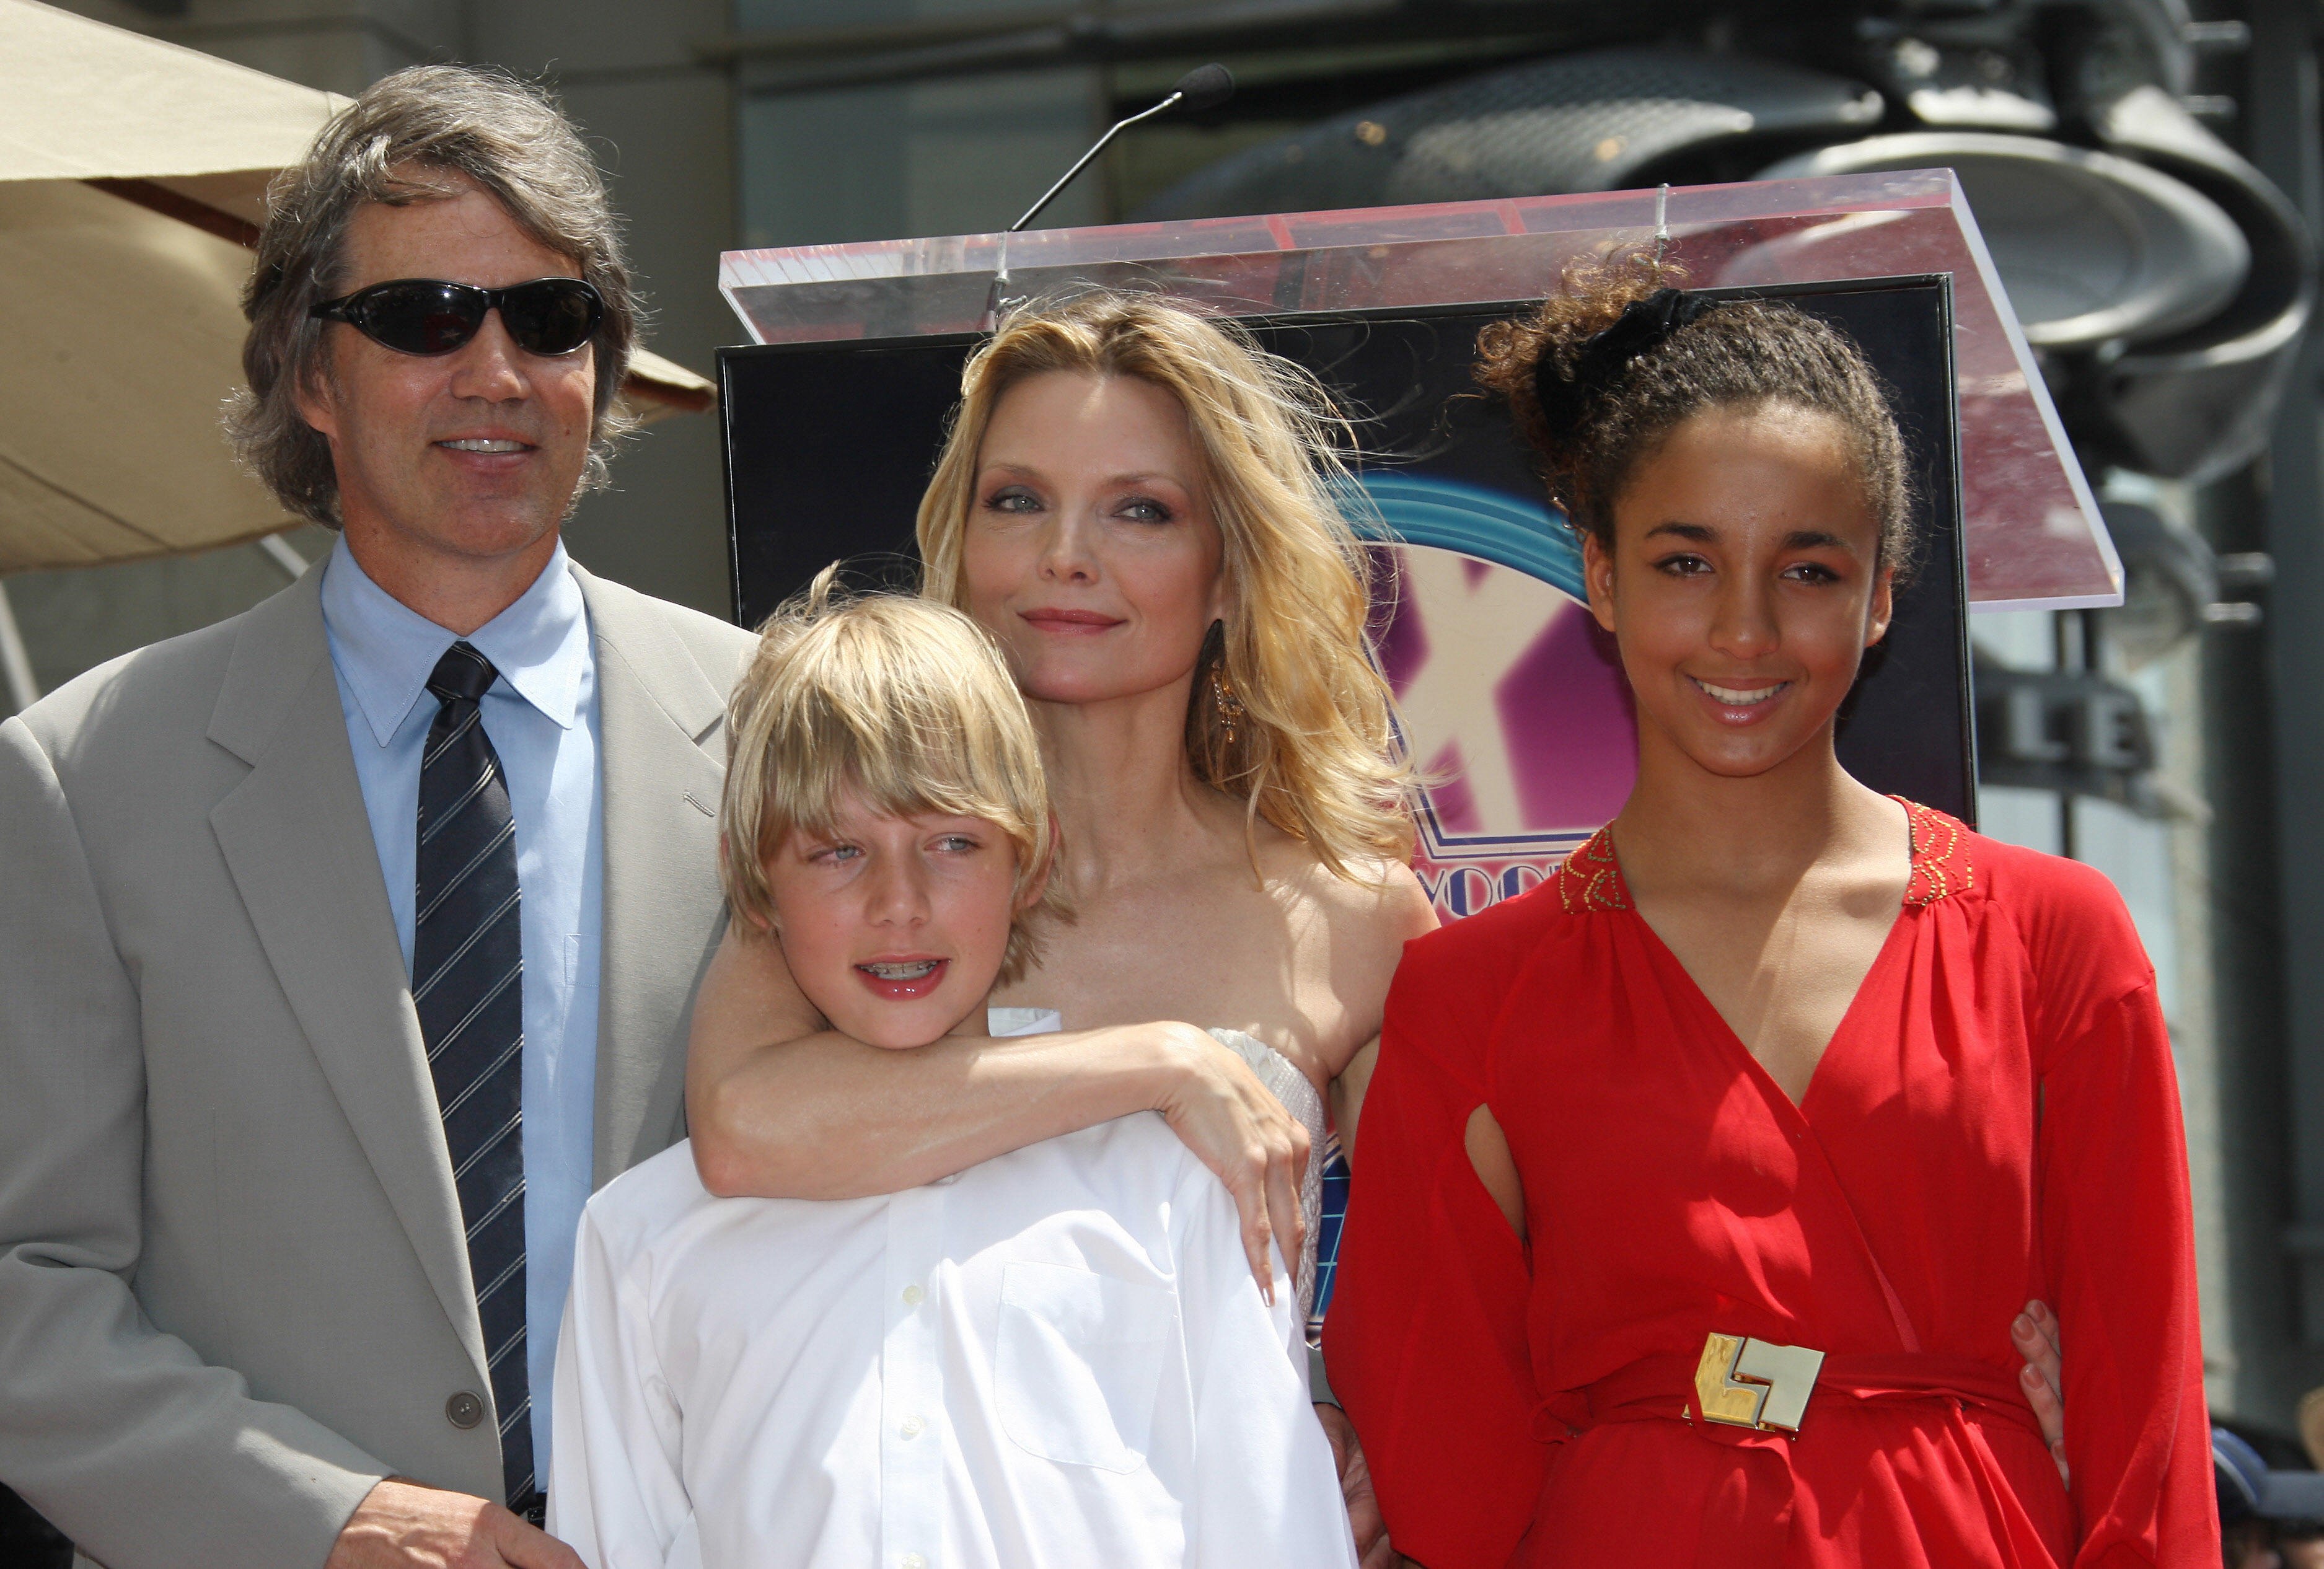 US actress Michelle Pfeiffer poses with her daughter Claudia (R), her son John (C) and her husband David E. Kelley during the presentation ceremony 06 August 2007, in Hollywood, California | Source: Getty Images